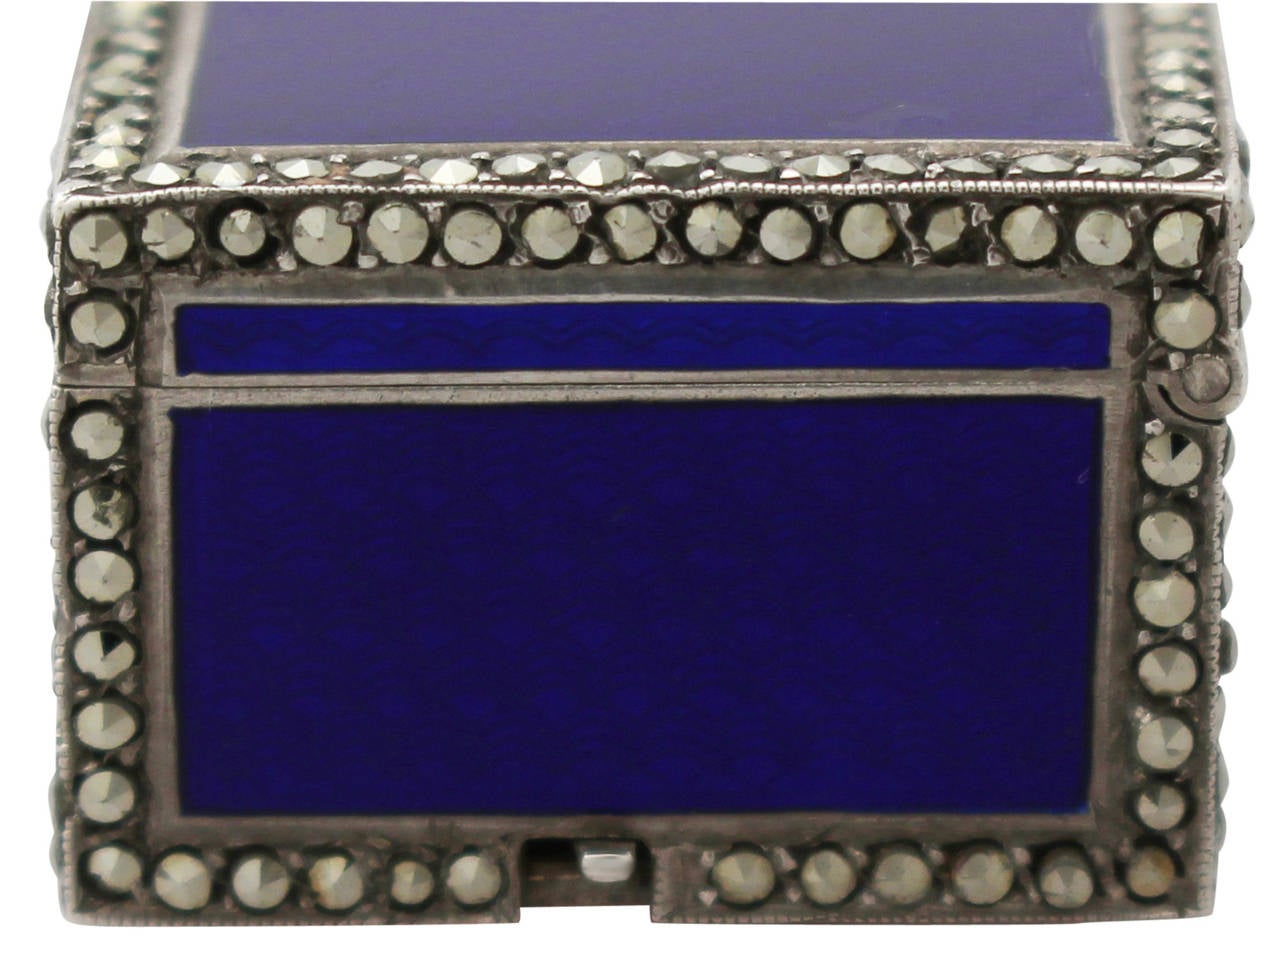 English 1900s Sterling Silver, Enamel and Marcasite Miniature Music Box